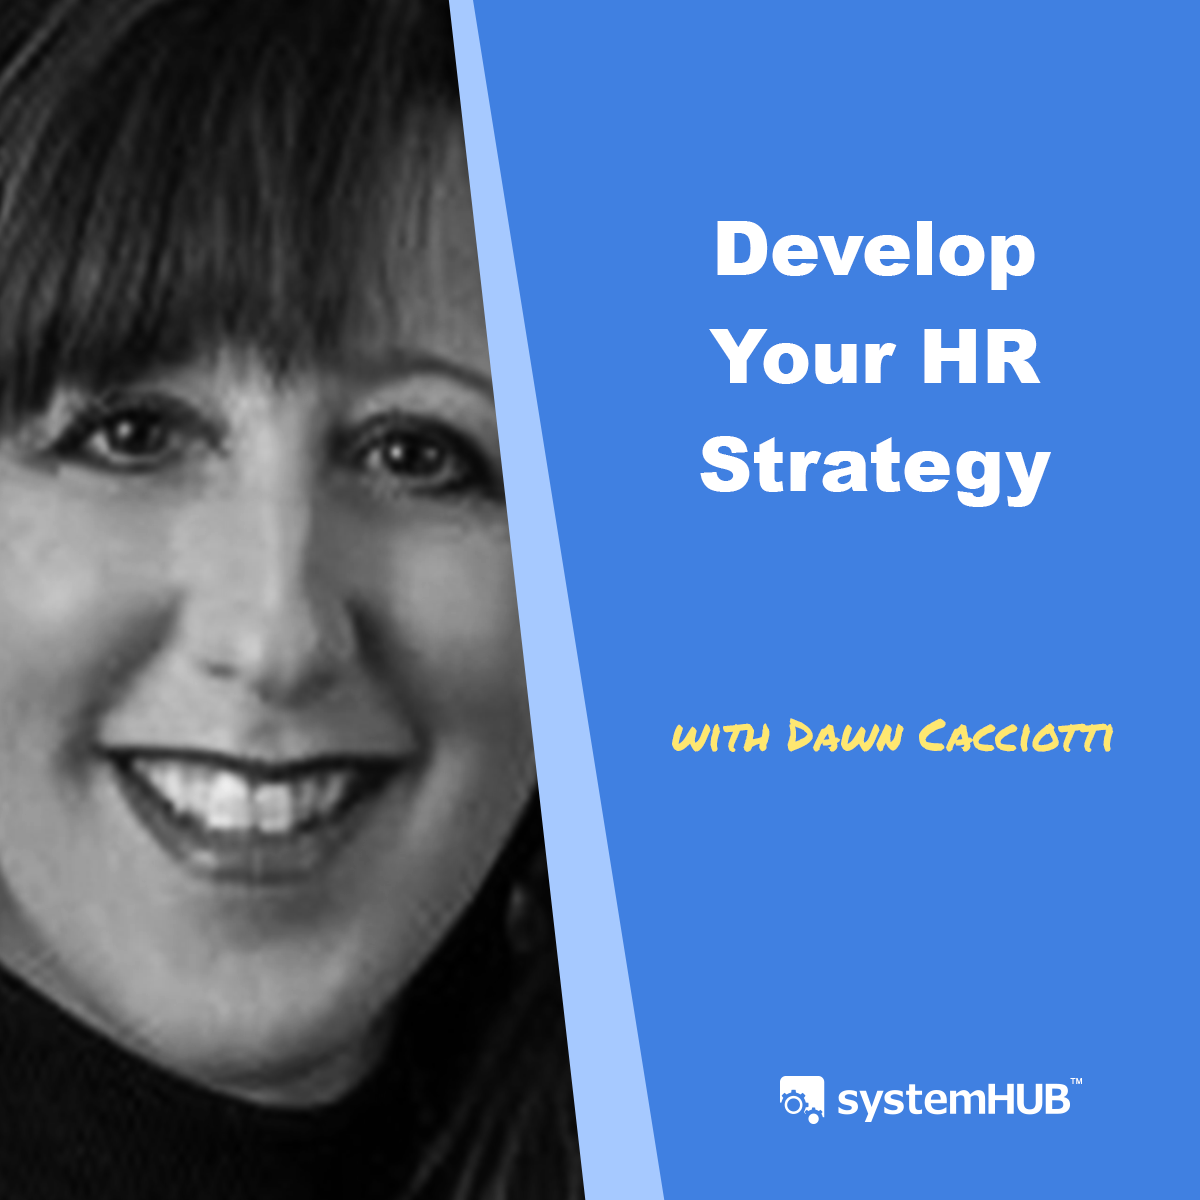 Developing an HR Strategy with Dawn Cacciotti